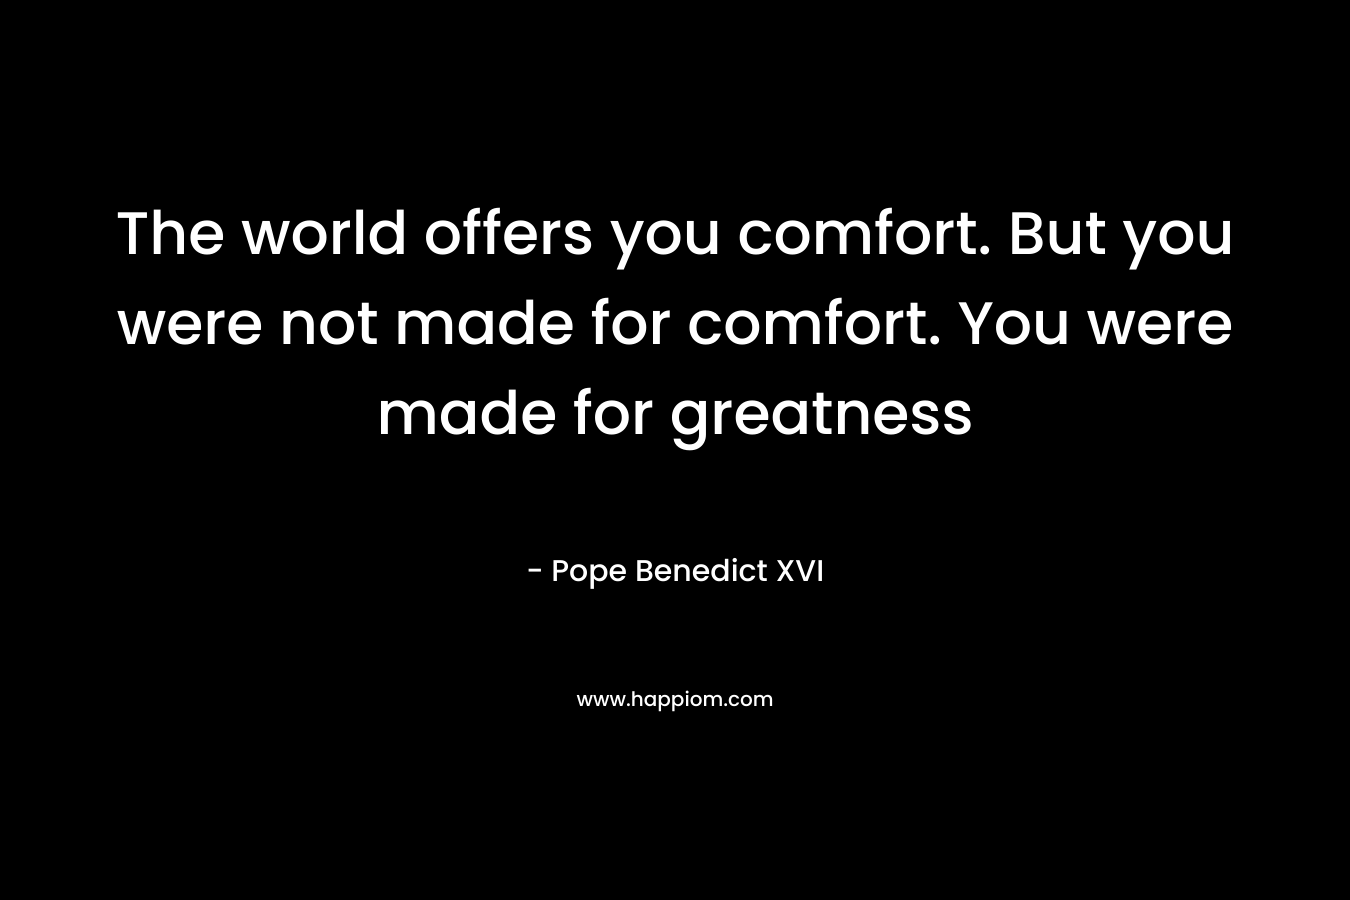 The world offers you comfort. But you were not made for comfort. You were made for greatness